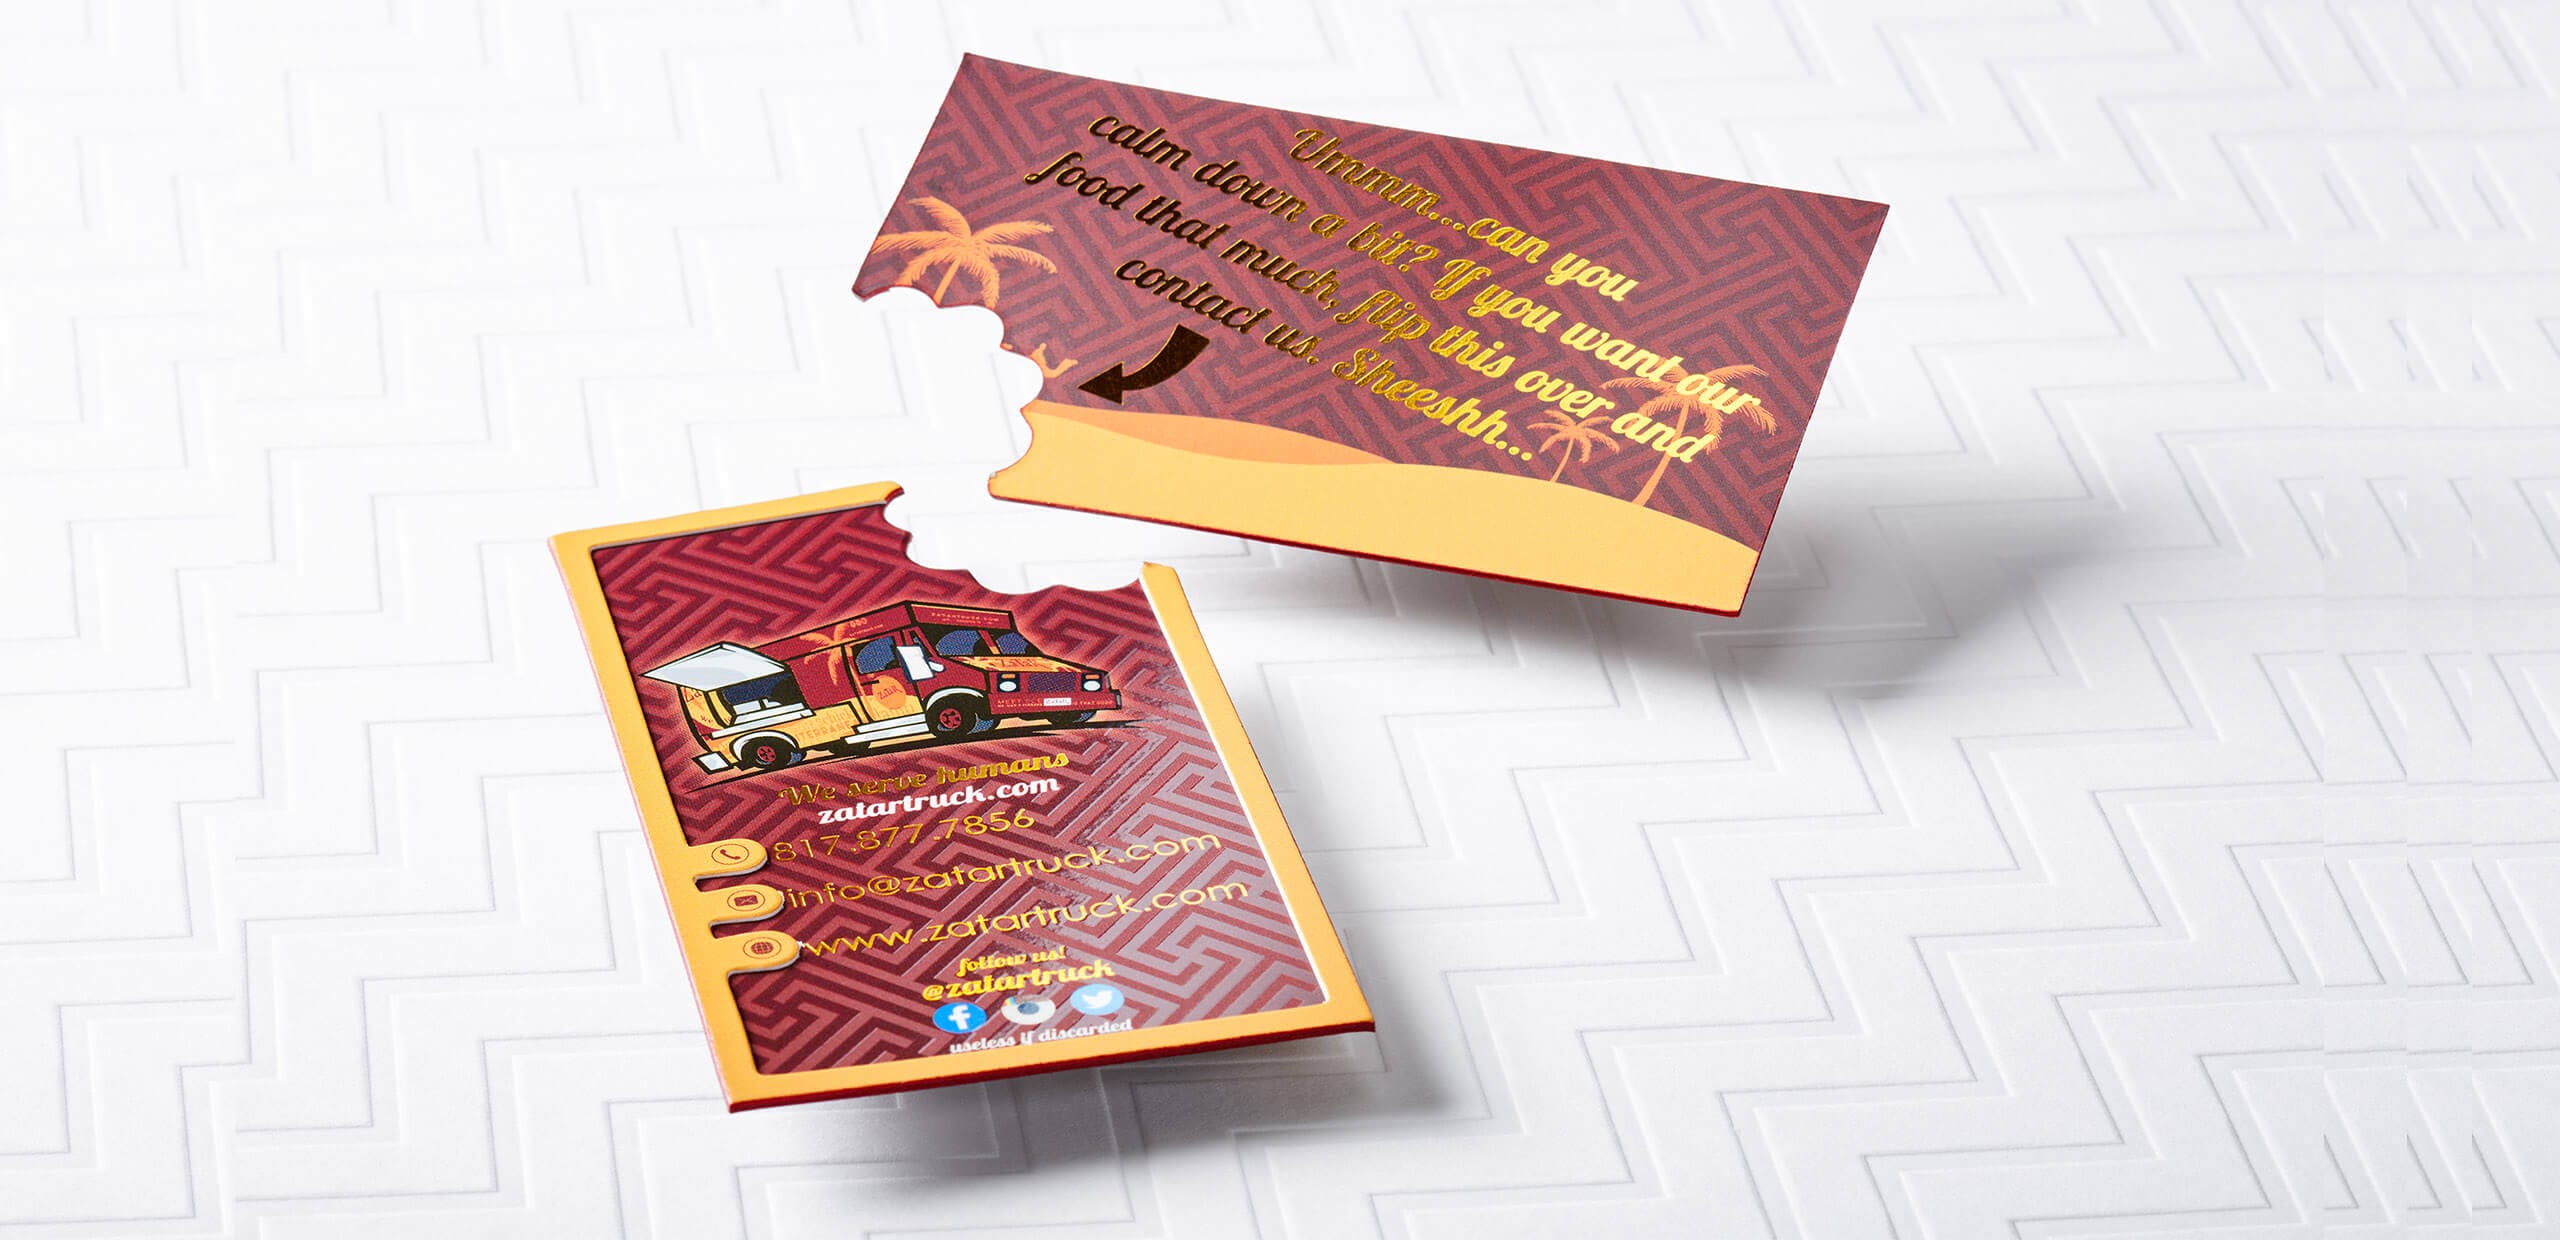 We provide Custom Die Cutting Services